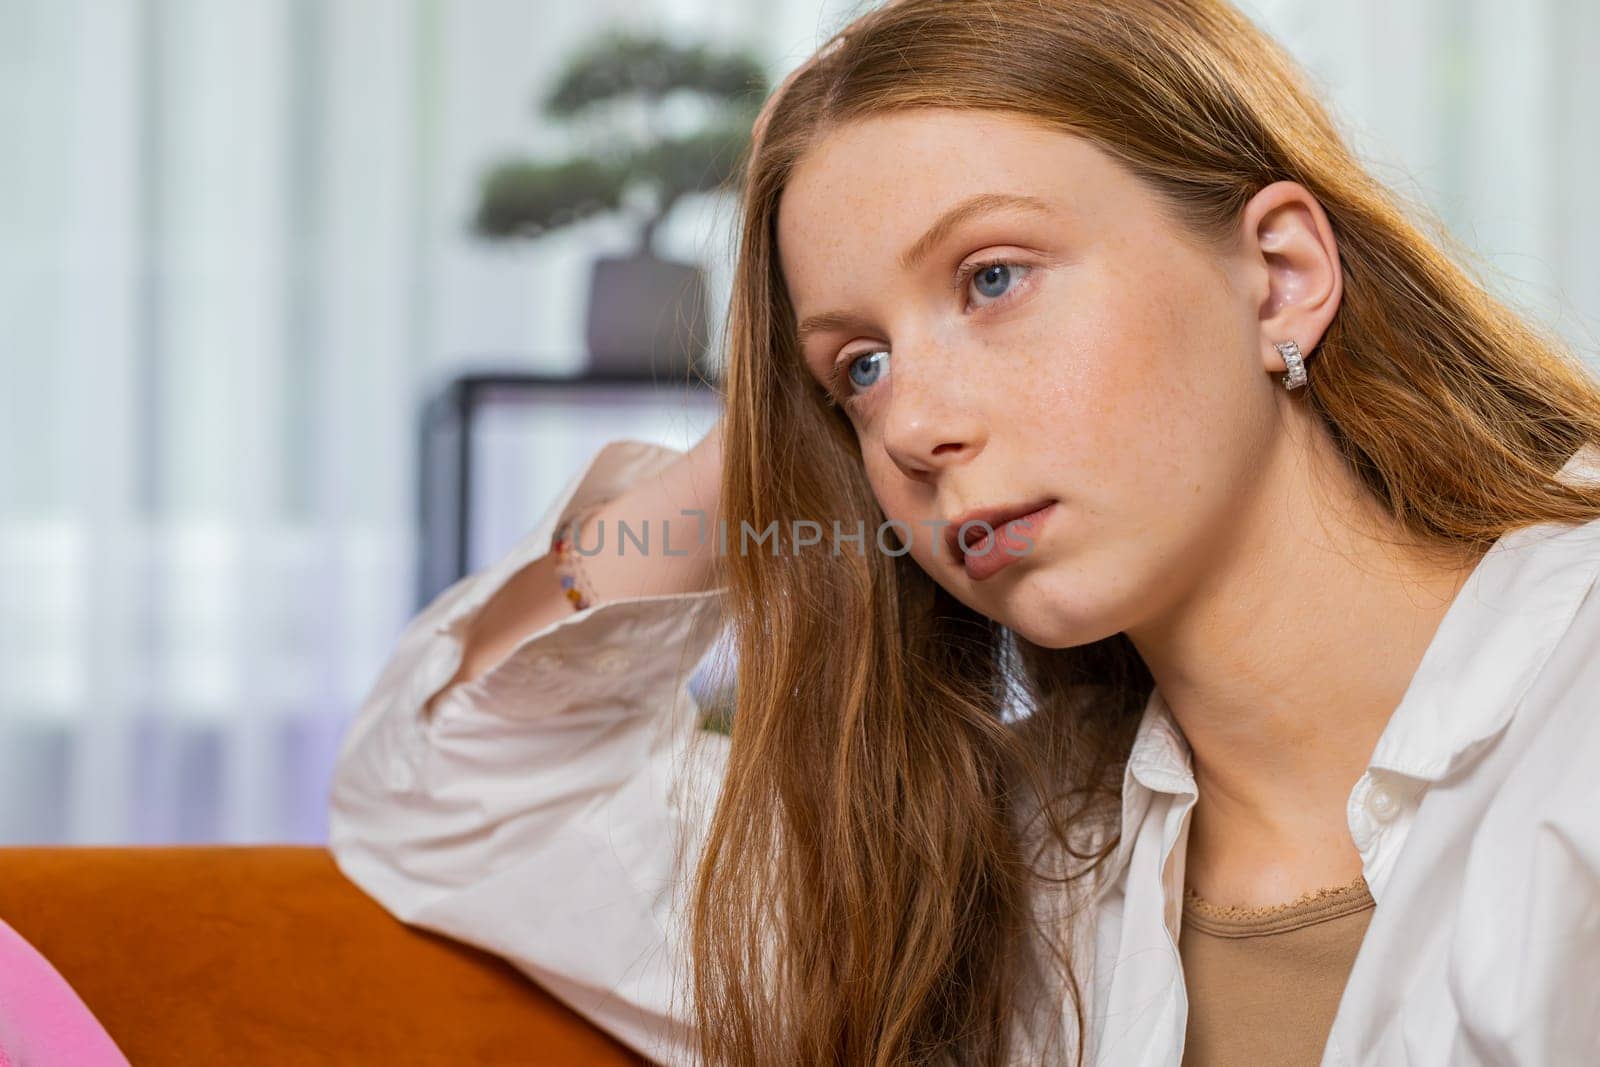 Sad lonely teenager girl sits at home room looks pensive thinks over life concerns or unrequited love suffers from unfair situation. Alone child problem break up depressed feeling bad annoyed burnout